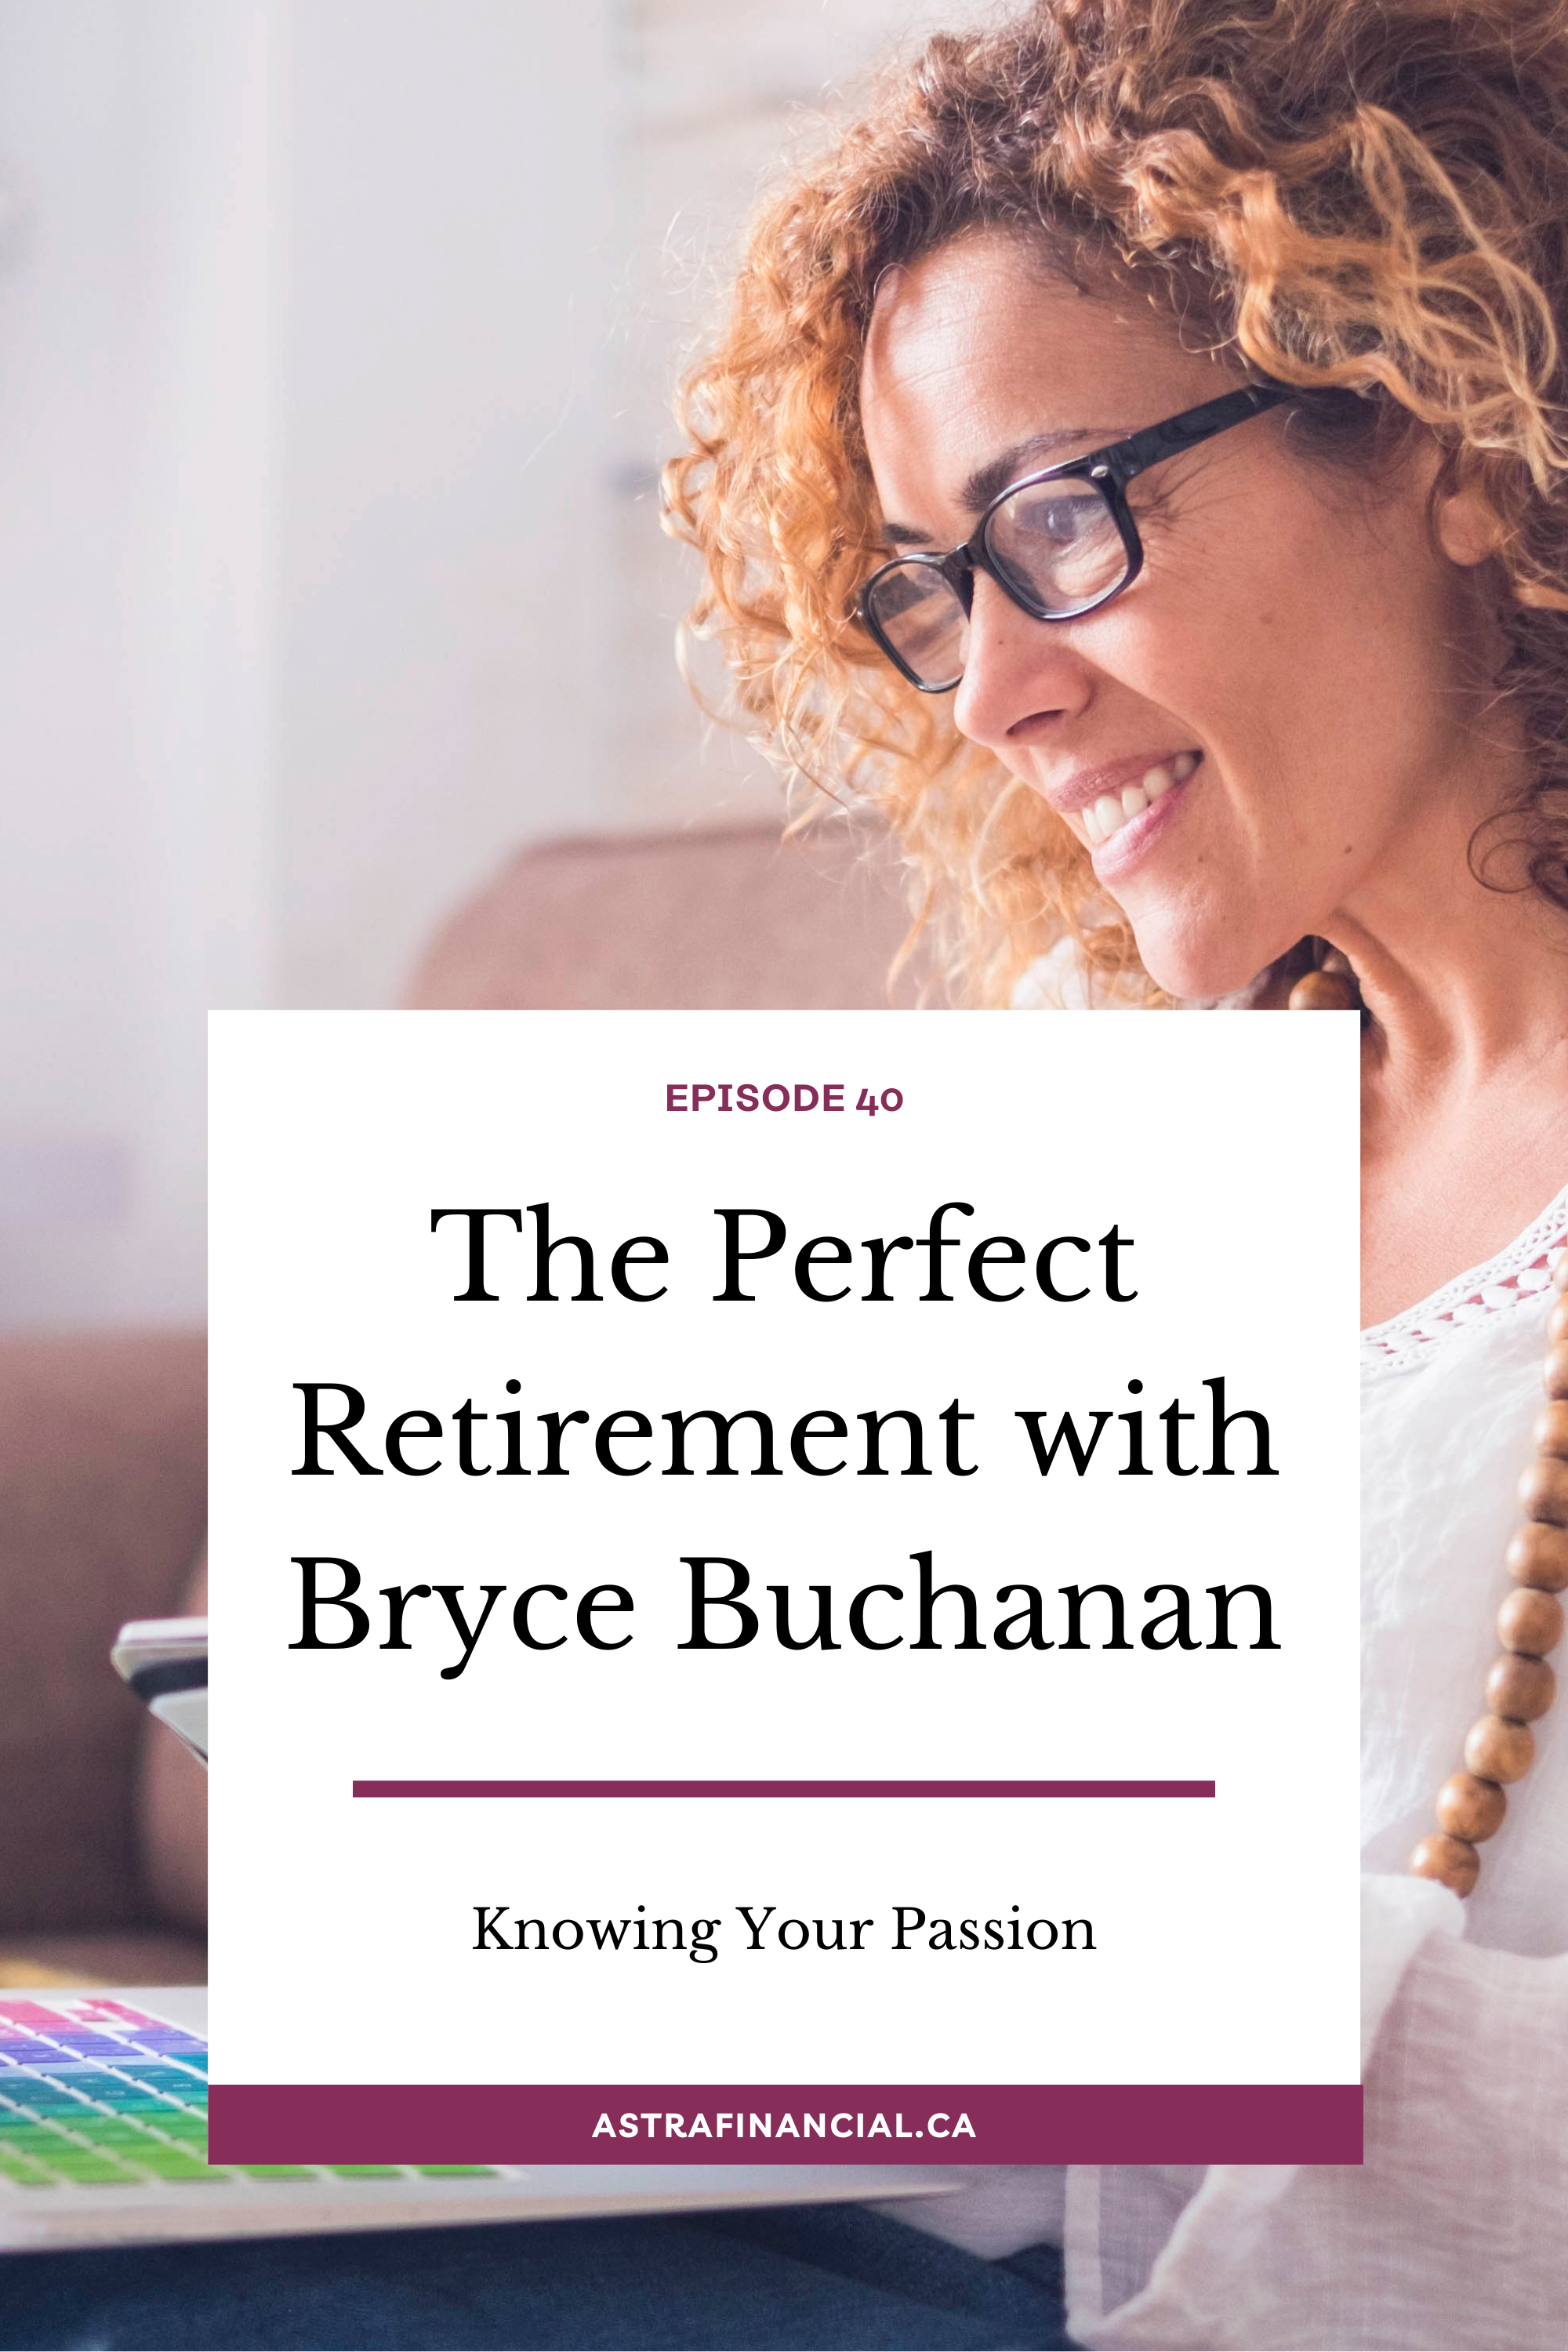 Episode 40 - The Perfect Retirement with Bryce Buchanan by Astra Financial